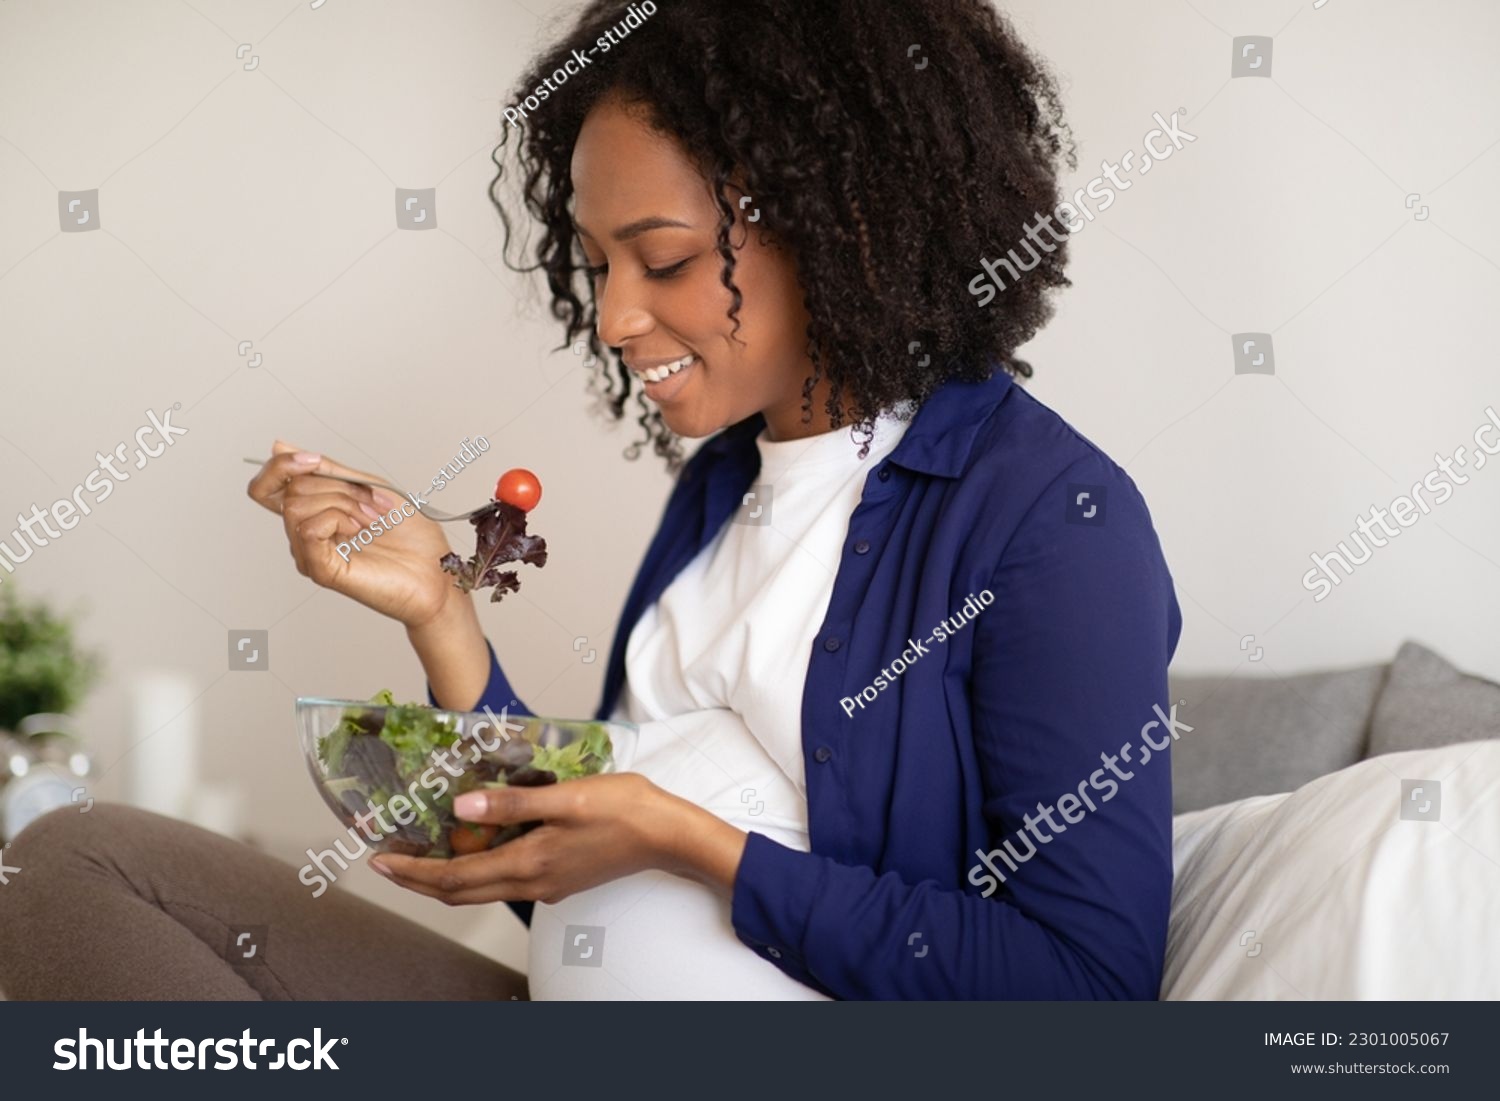 Smiling millennial african american lady with big belly eating salad in room interior, close up. Health care, proper nutrition, vegan and expectation of child, motherhood and family #2301005067